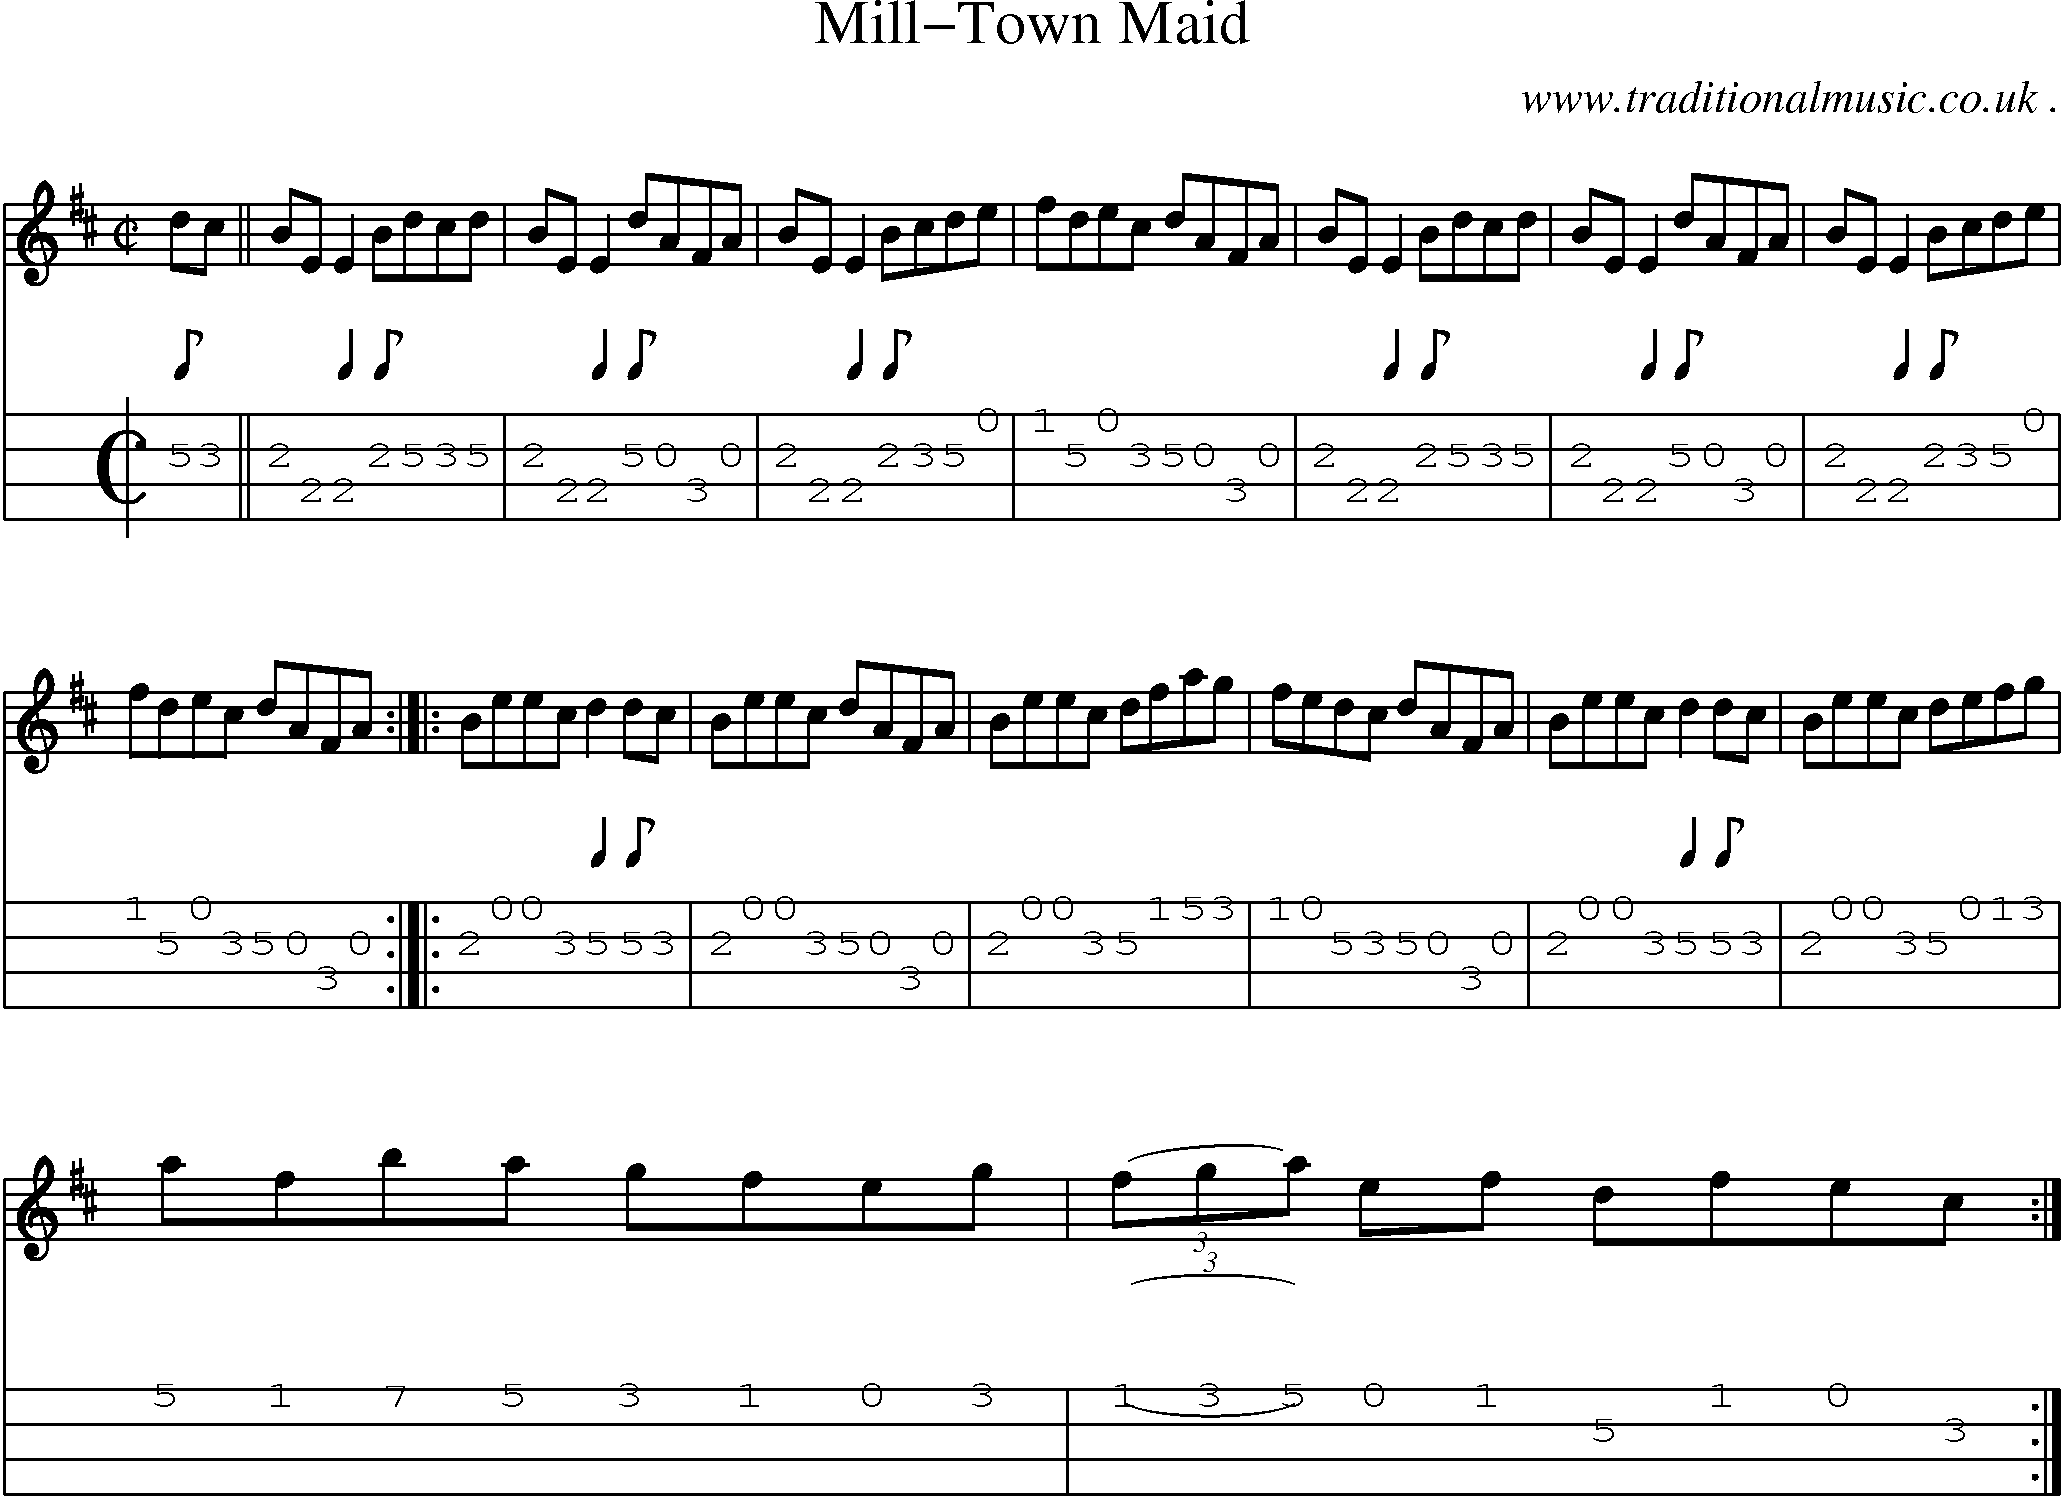 Sheet-Music and Mandolin Tabs for Mill-town Maid